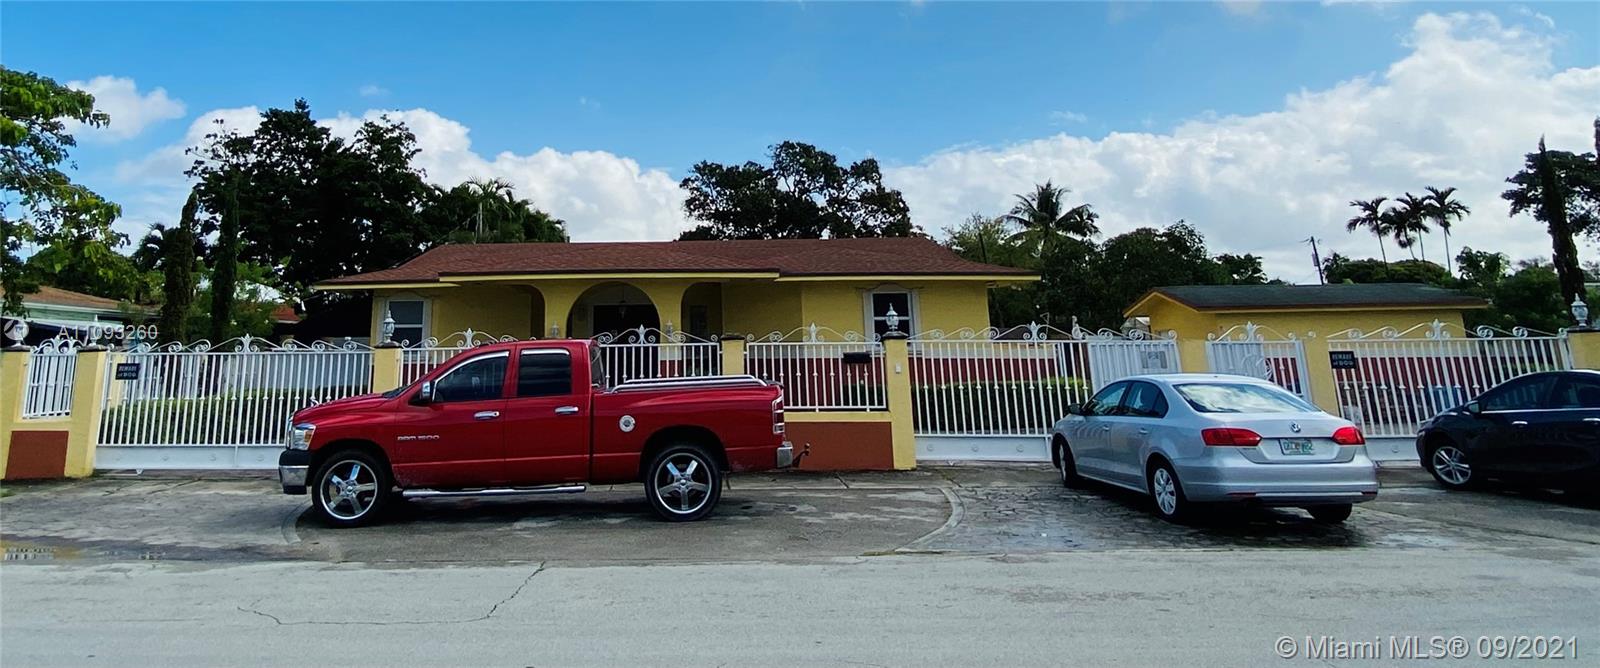 1631 NW 32nd Ave, Miami, Florida 33125, 4 Bedrooms Bedrooms, ,5 BathroomsBathrooms,Residential,For Sale,1631 NW 32nd Ave,A11093260